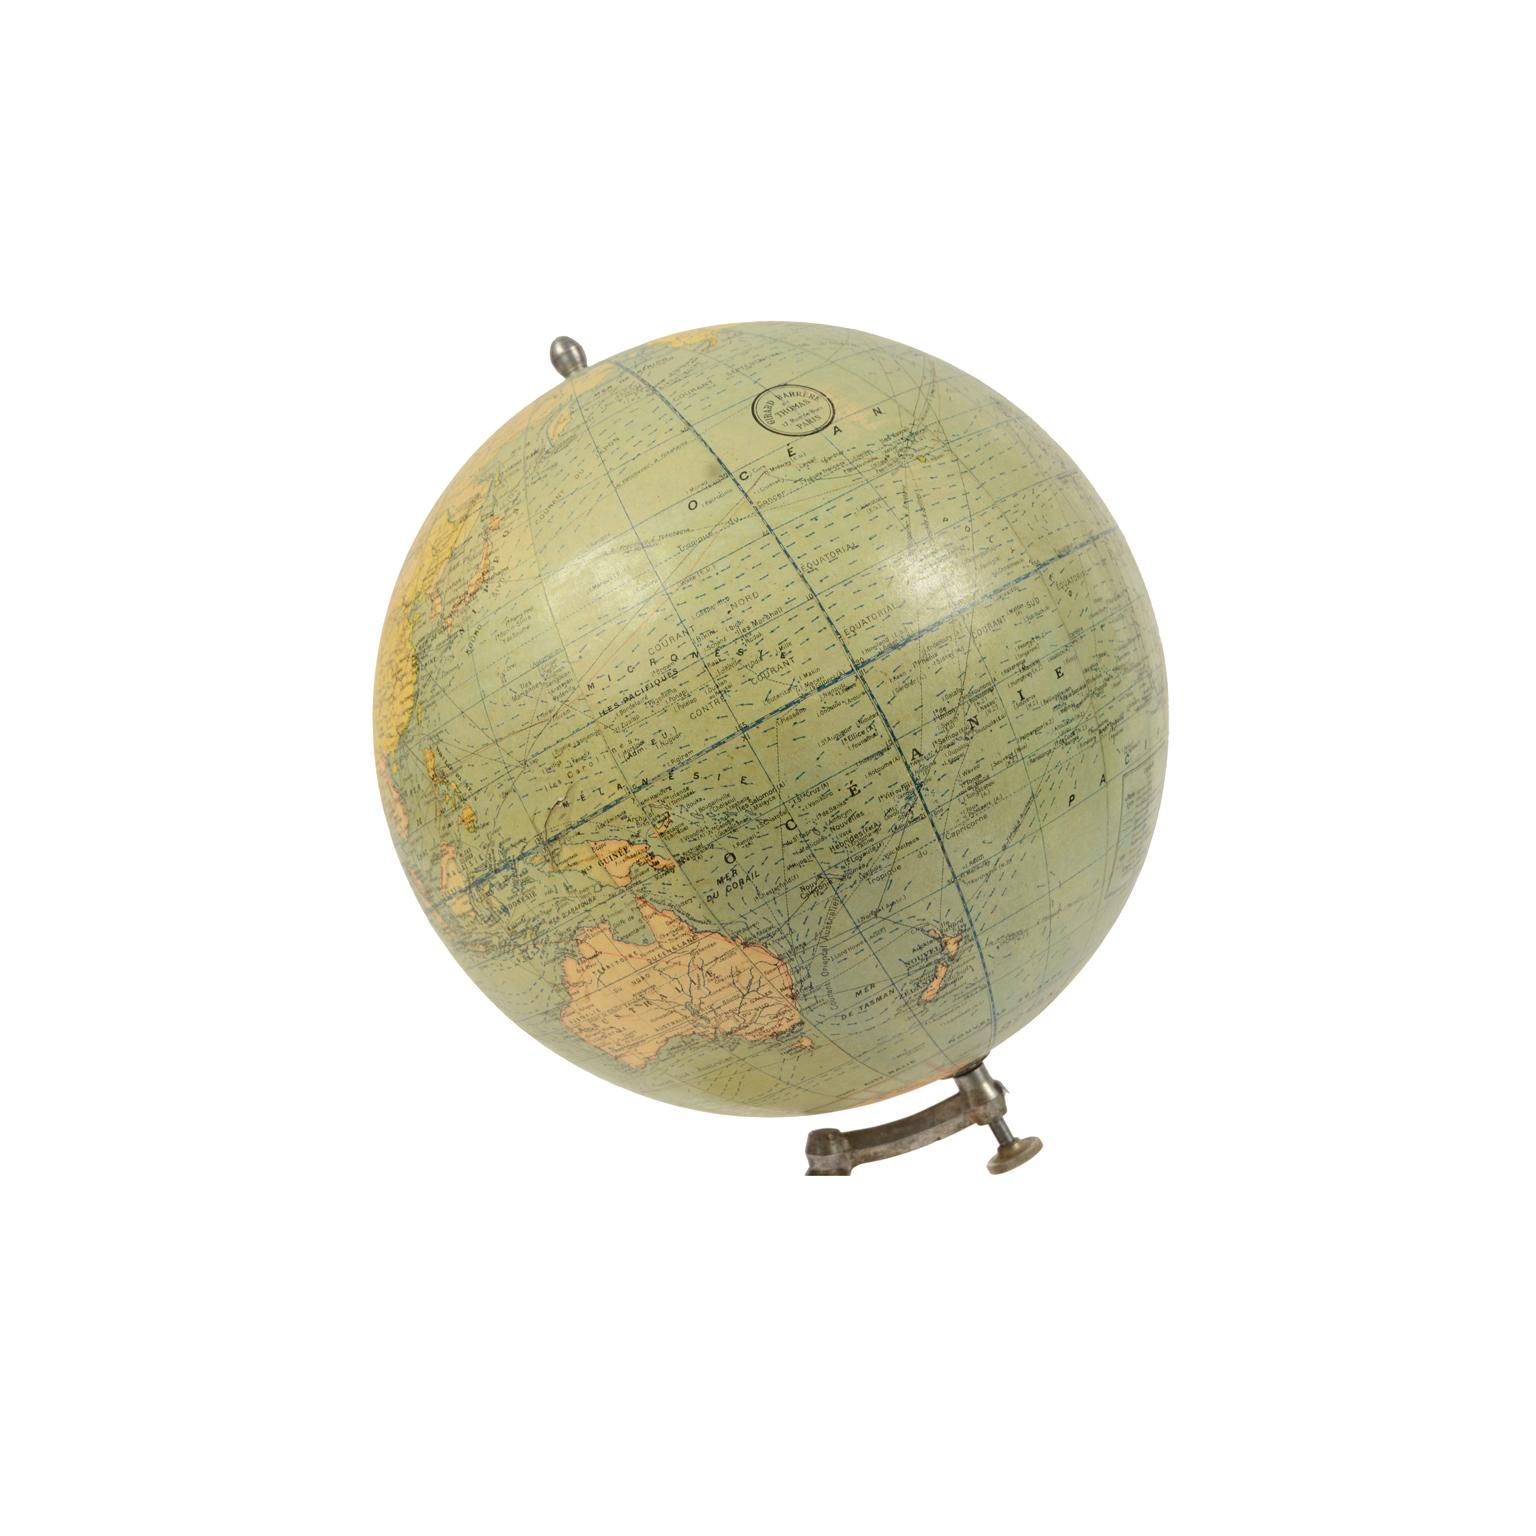 French Antique Terrestrial Globe Published in 1940s by Girard Barrère et Thomas, Paris For Sale